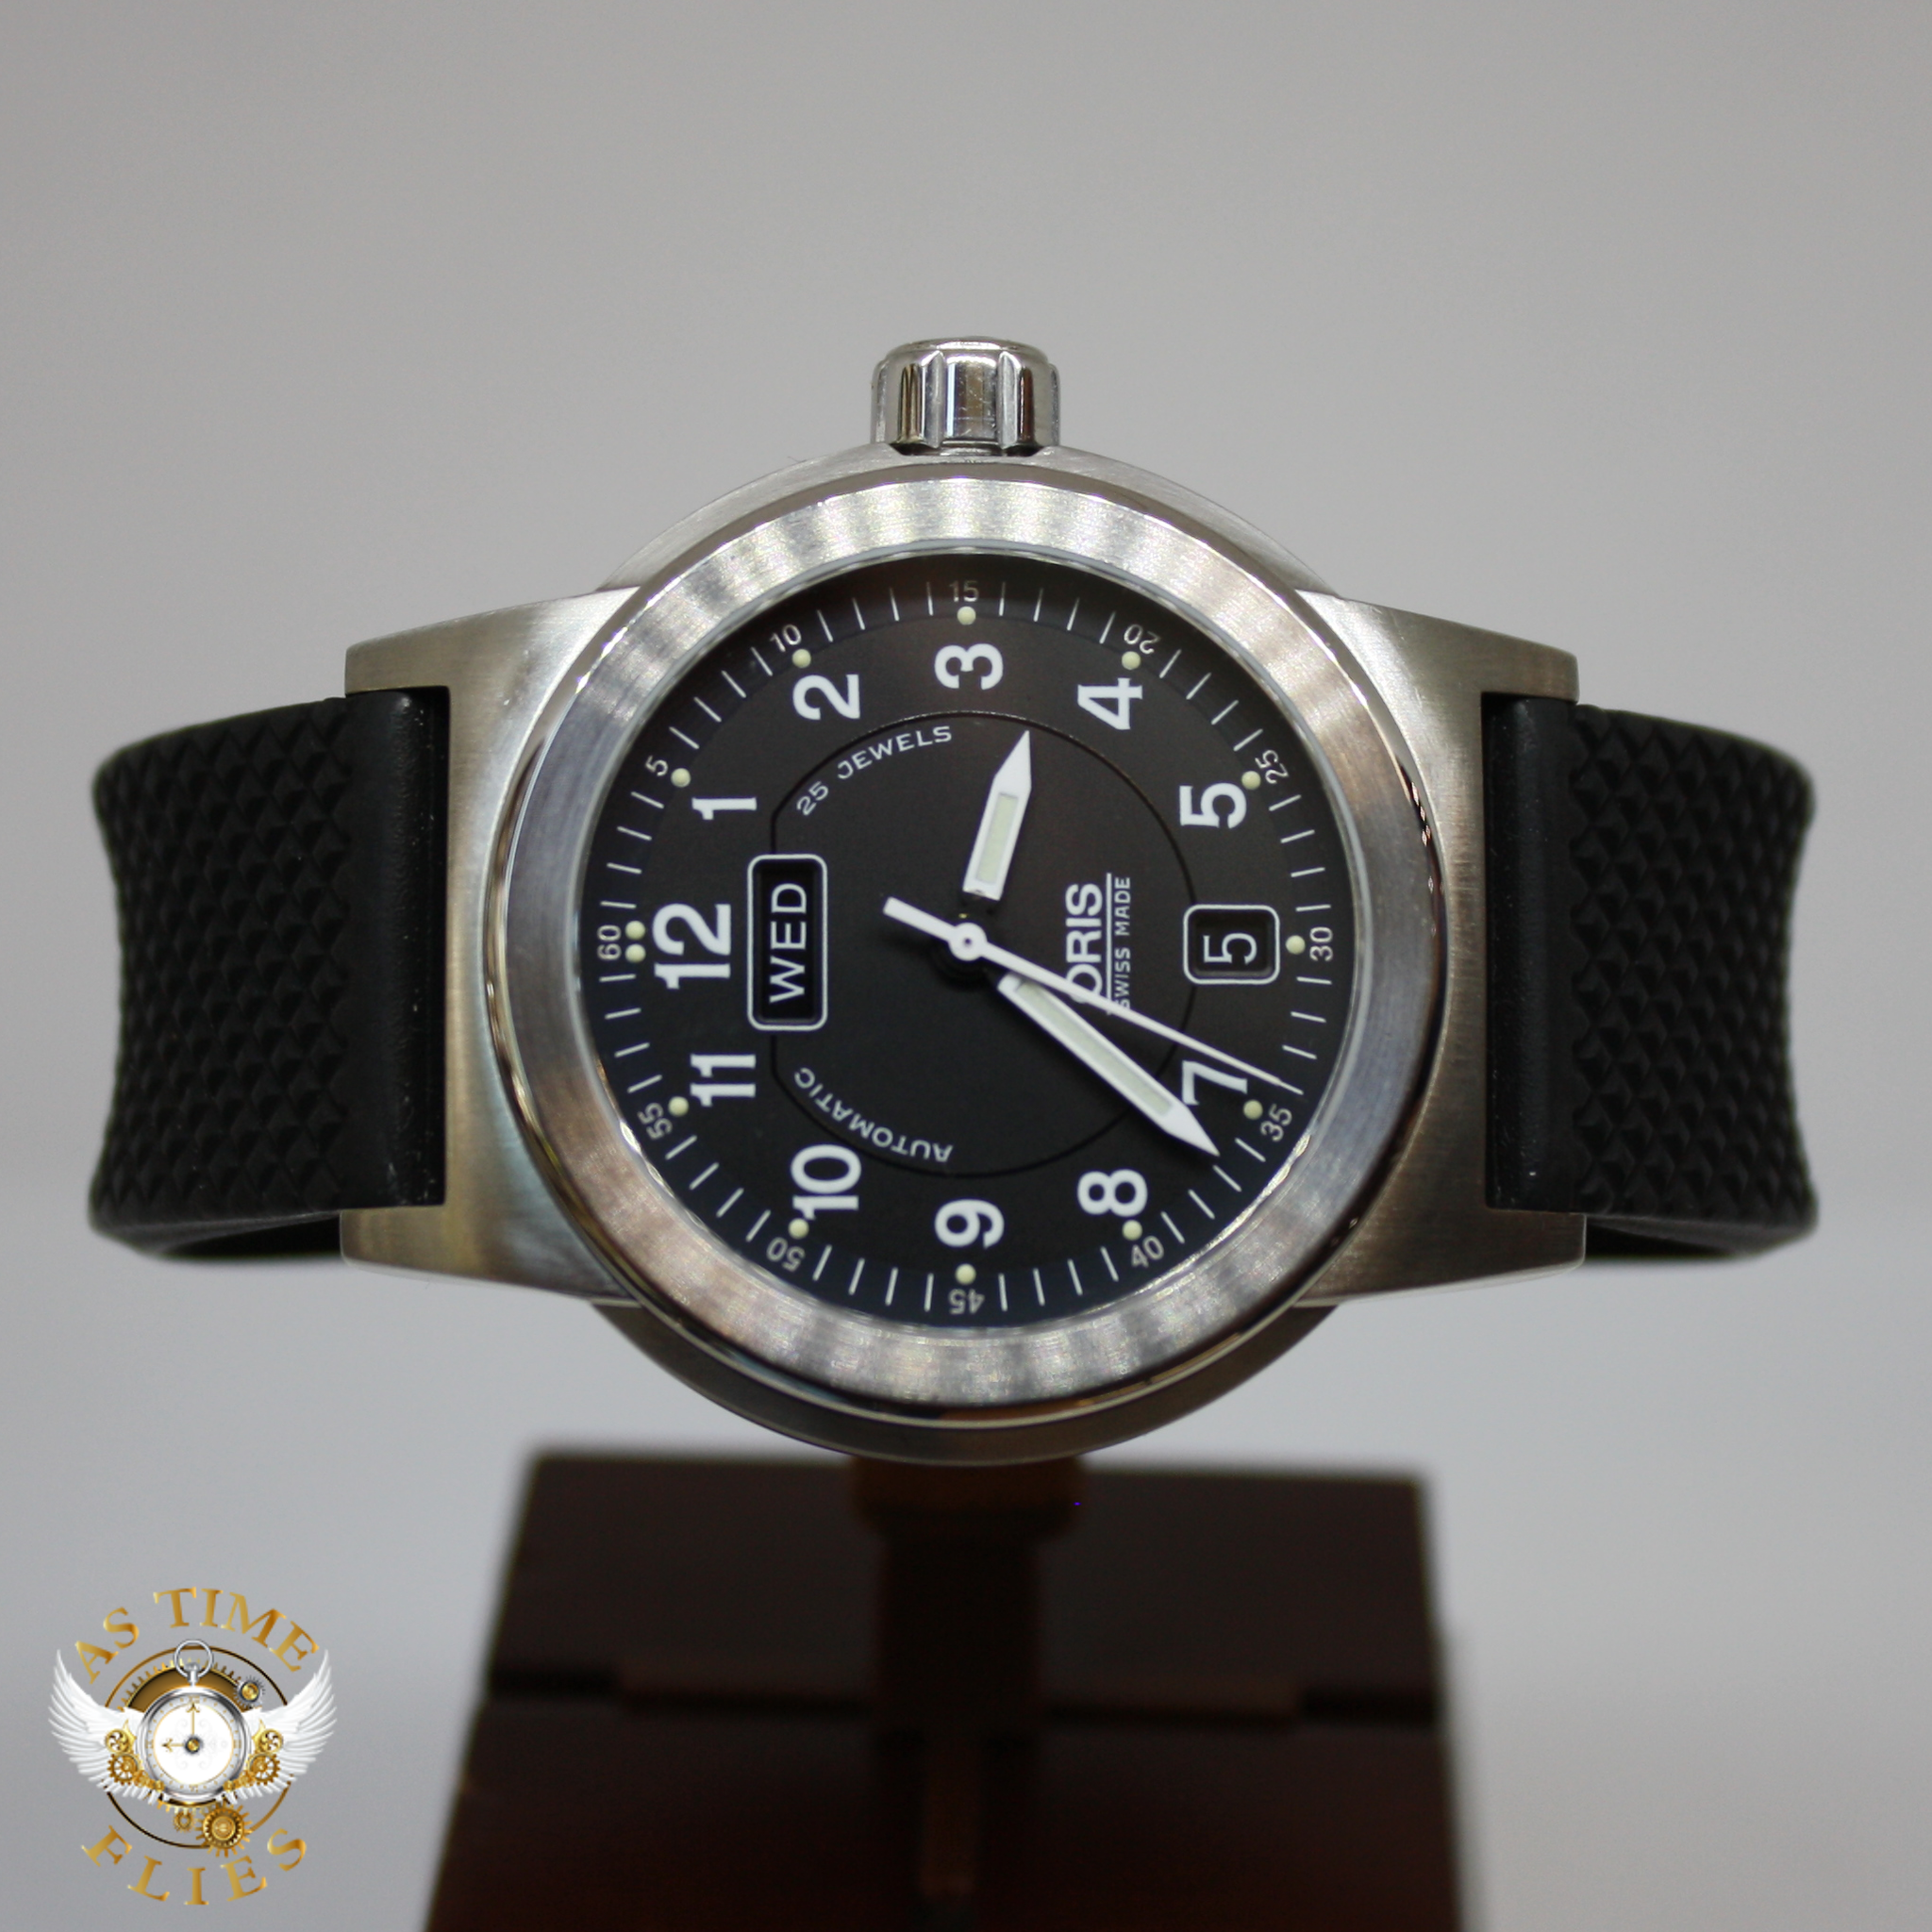 Oris BC3 7500 "Big Crown" Day-Date Ref. 63575004164rs